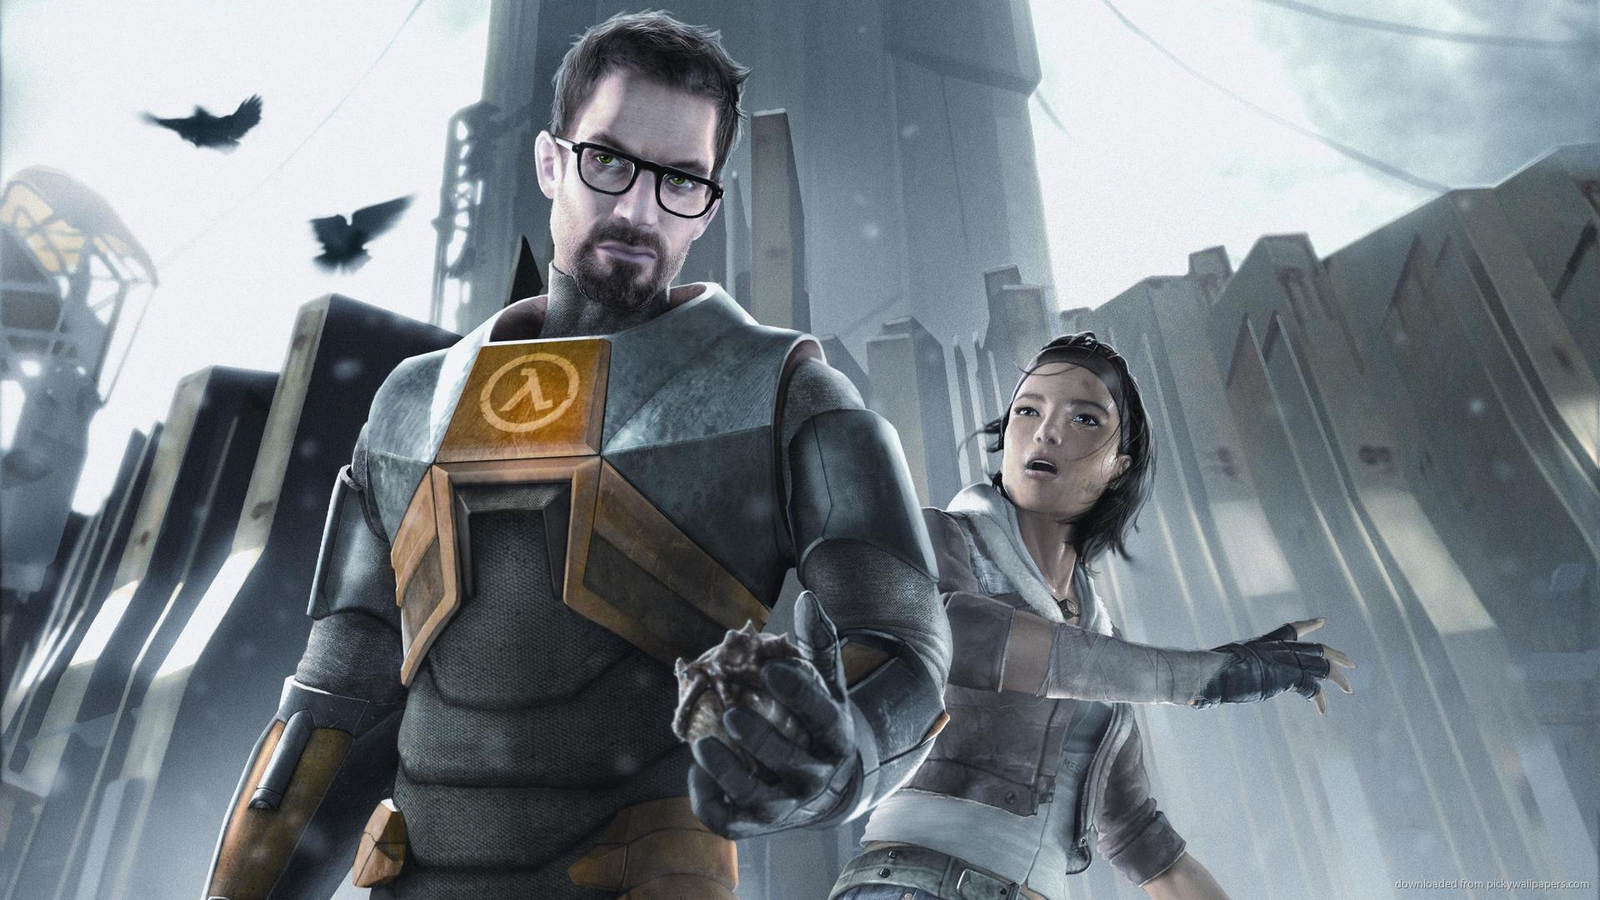 Half-Life: Alyx Source 2 level editor is being worked on now